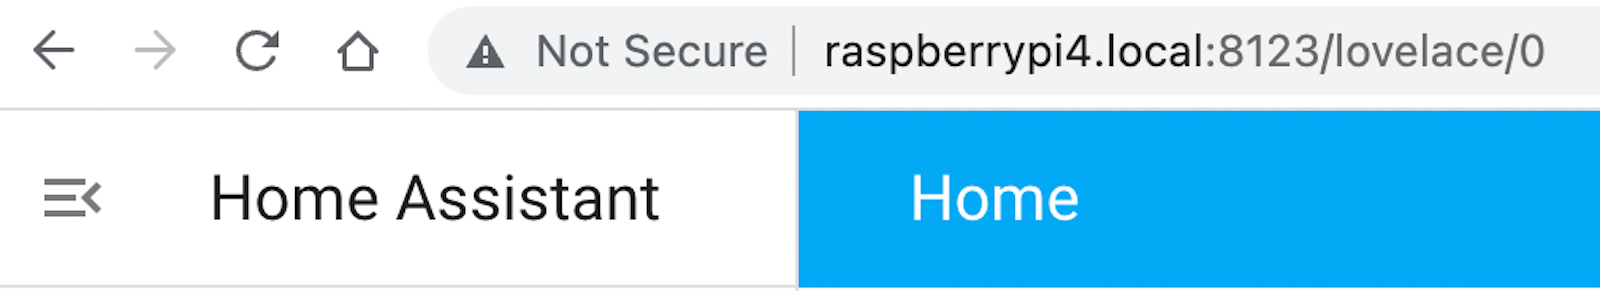 A screenshot of a Raspberry Pi’s IP address/URL followed by the Home Assistant’s port number. 